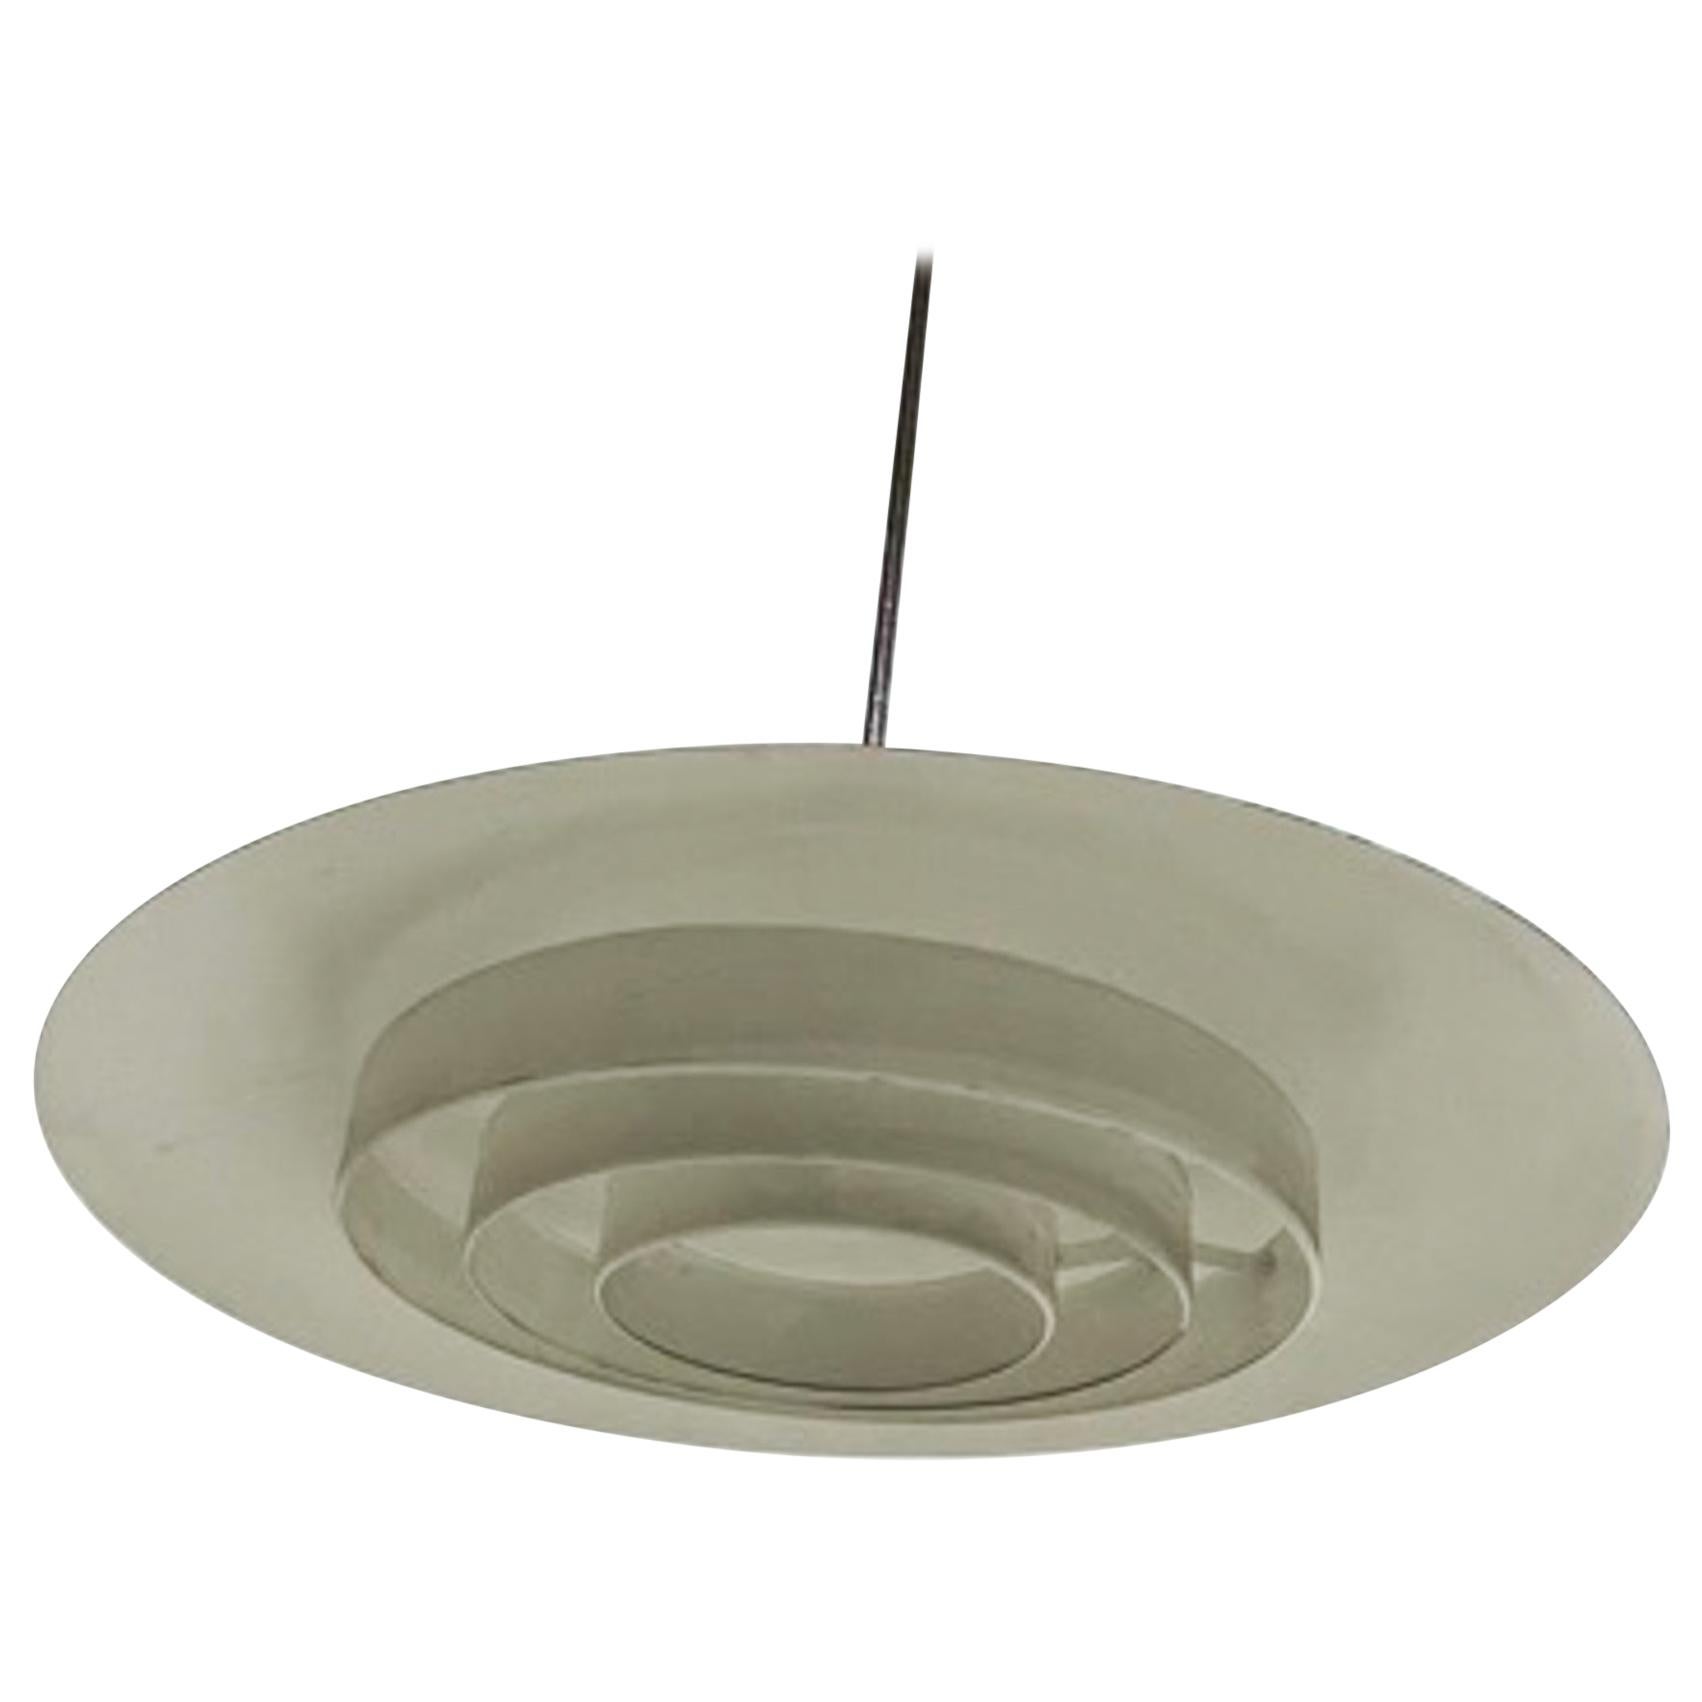 modern pendant chandelier
from Museum of Modern Art La Jolla, CA.
design of the lower diffuser is similar to Louis Poulsen-Poul Henningsen pendants from Scandinavia.
made in the USA circa the 1960s. no label.
Oversize disc shade in spoon steel